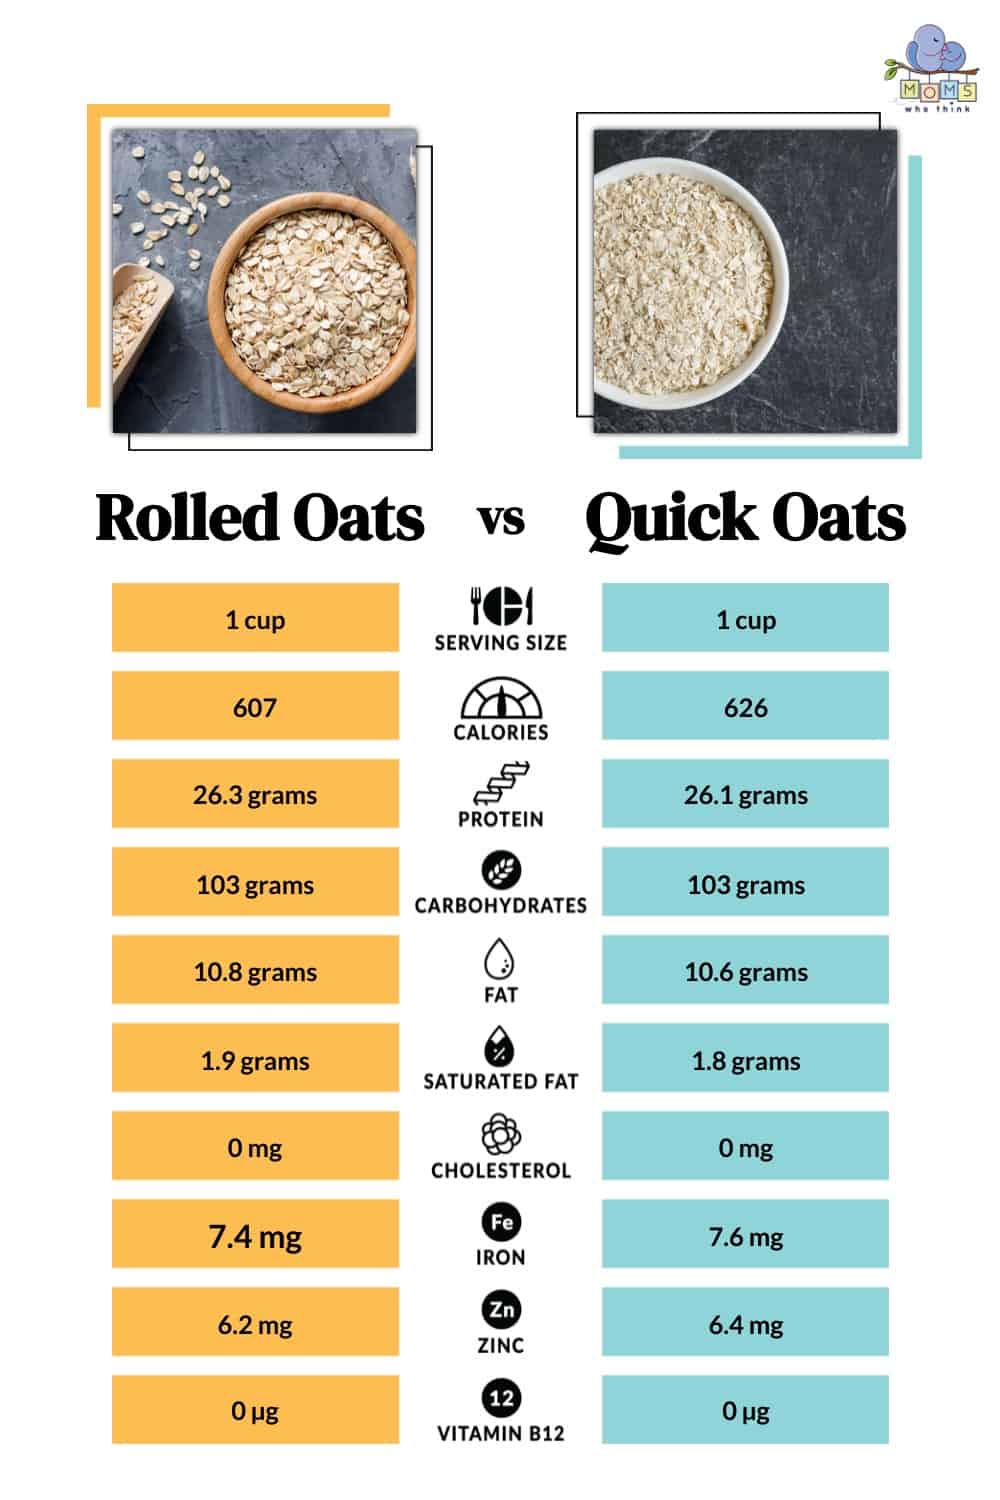 Rolled Oats vs Quick Oats Nutritional Facts